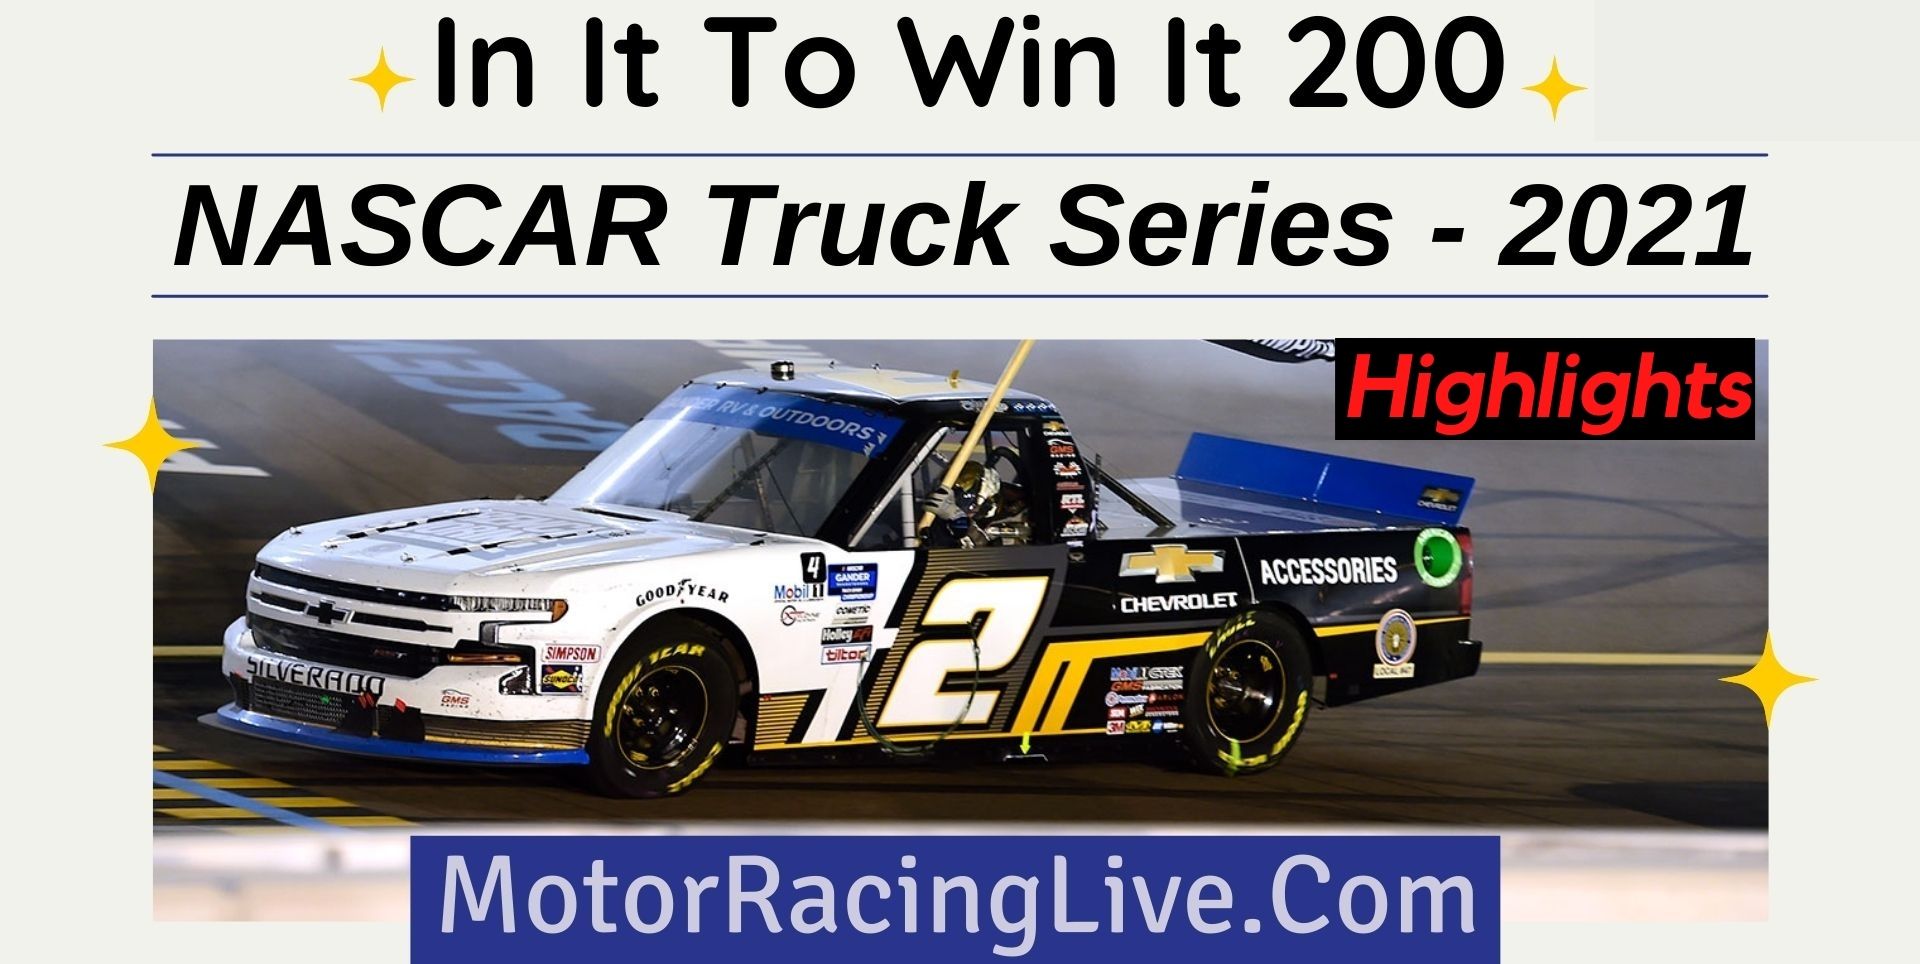 In It To Win It 200 Highlights 2021 NASCAR Truck